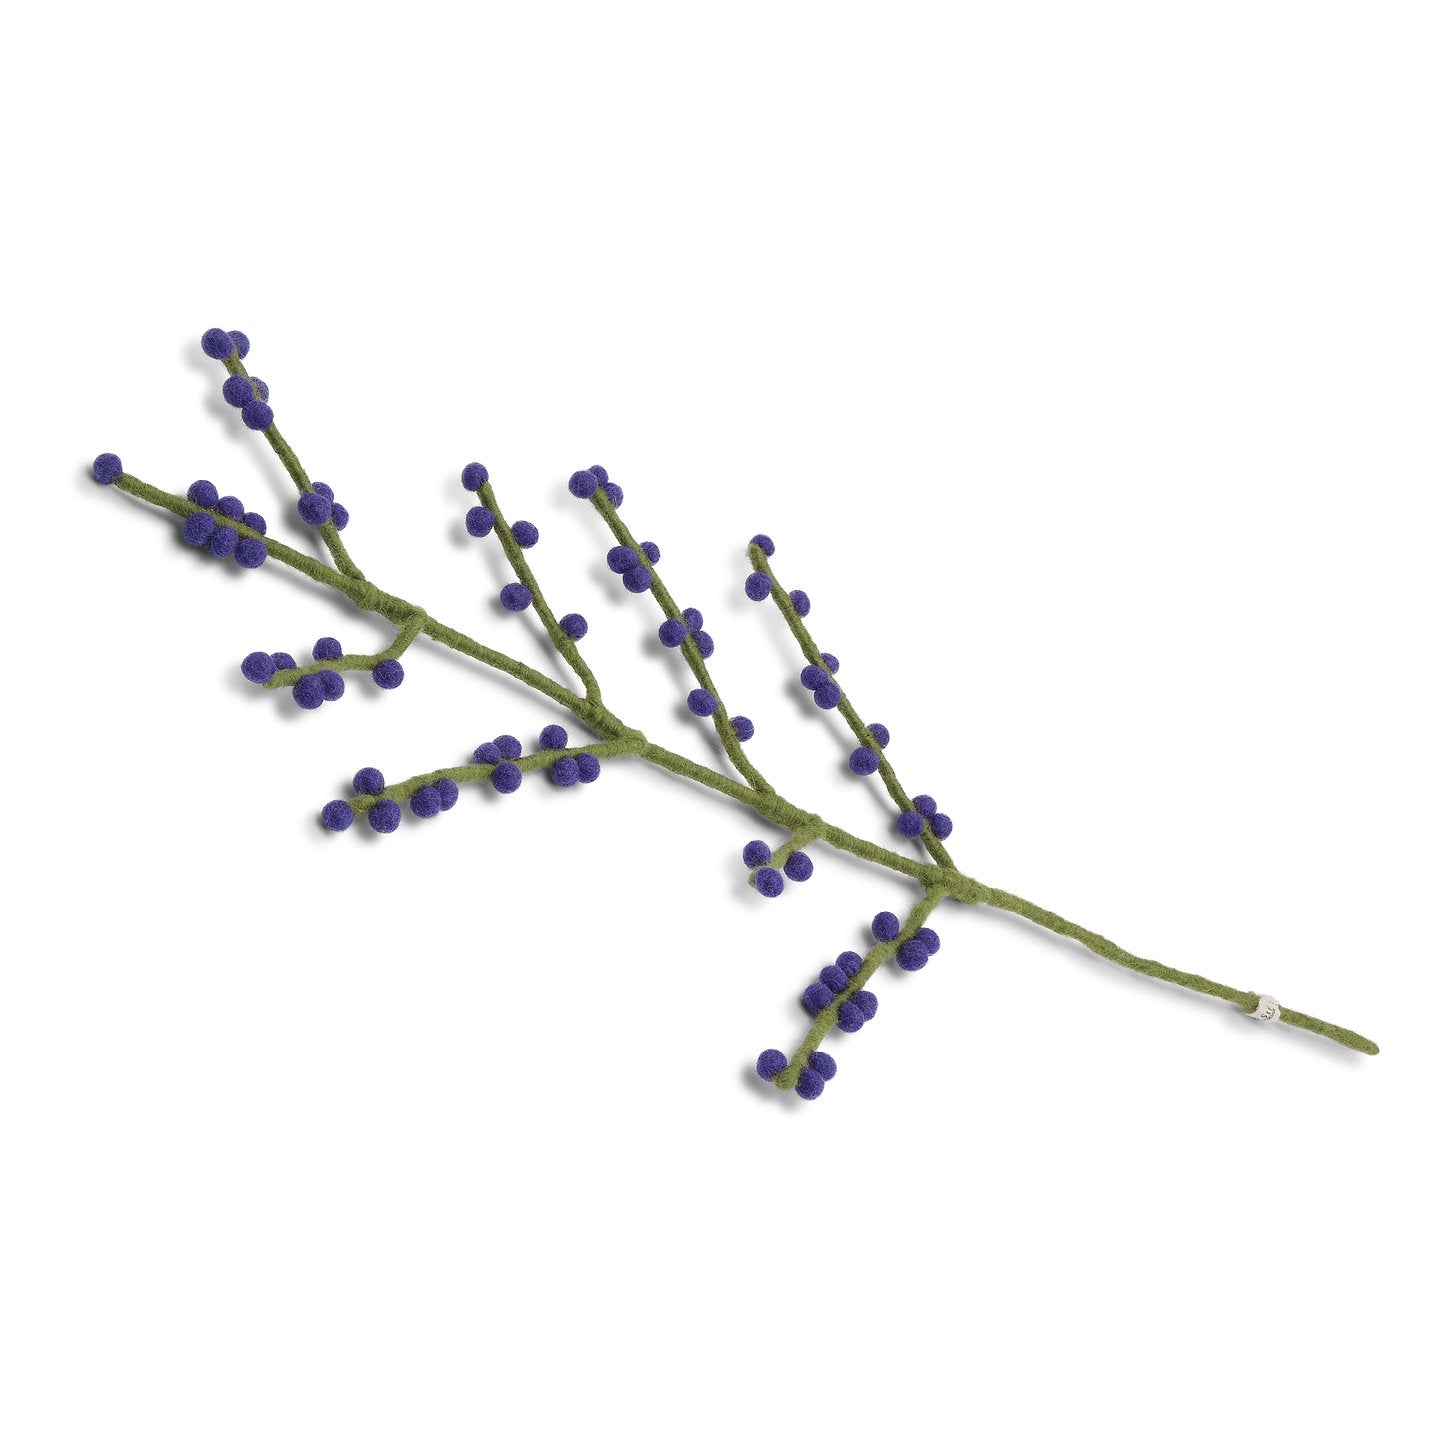 Felted Wool Branch with Blue Berries